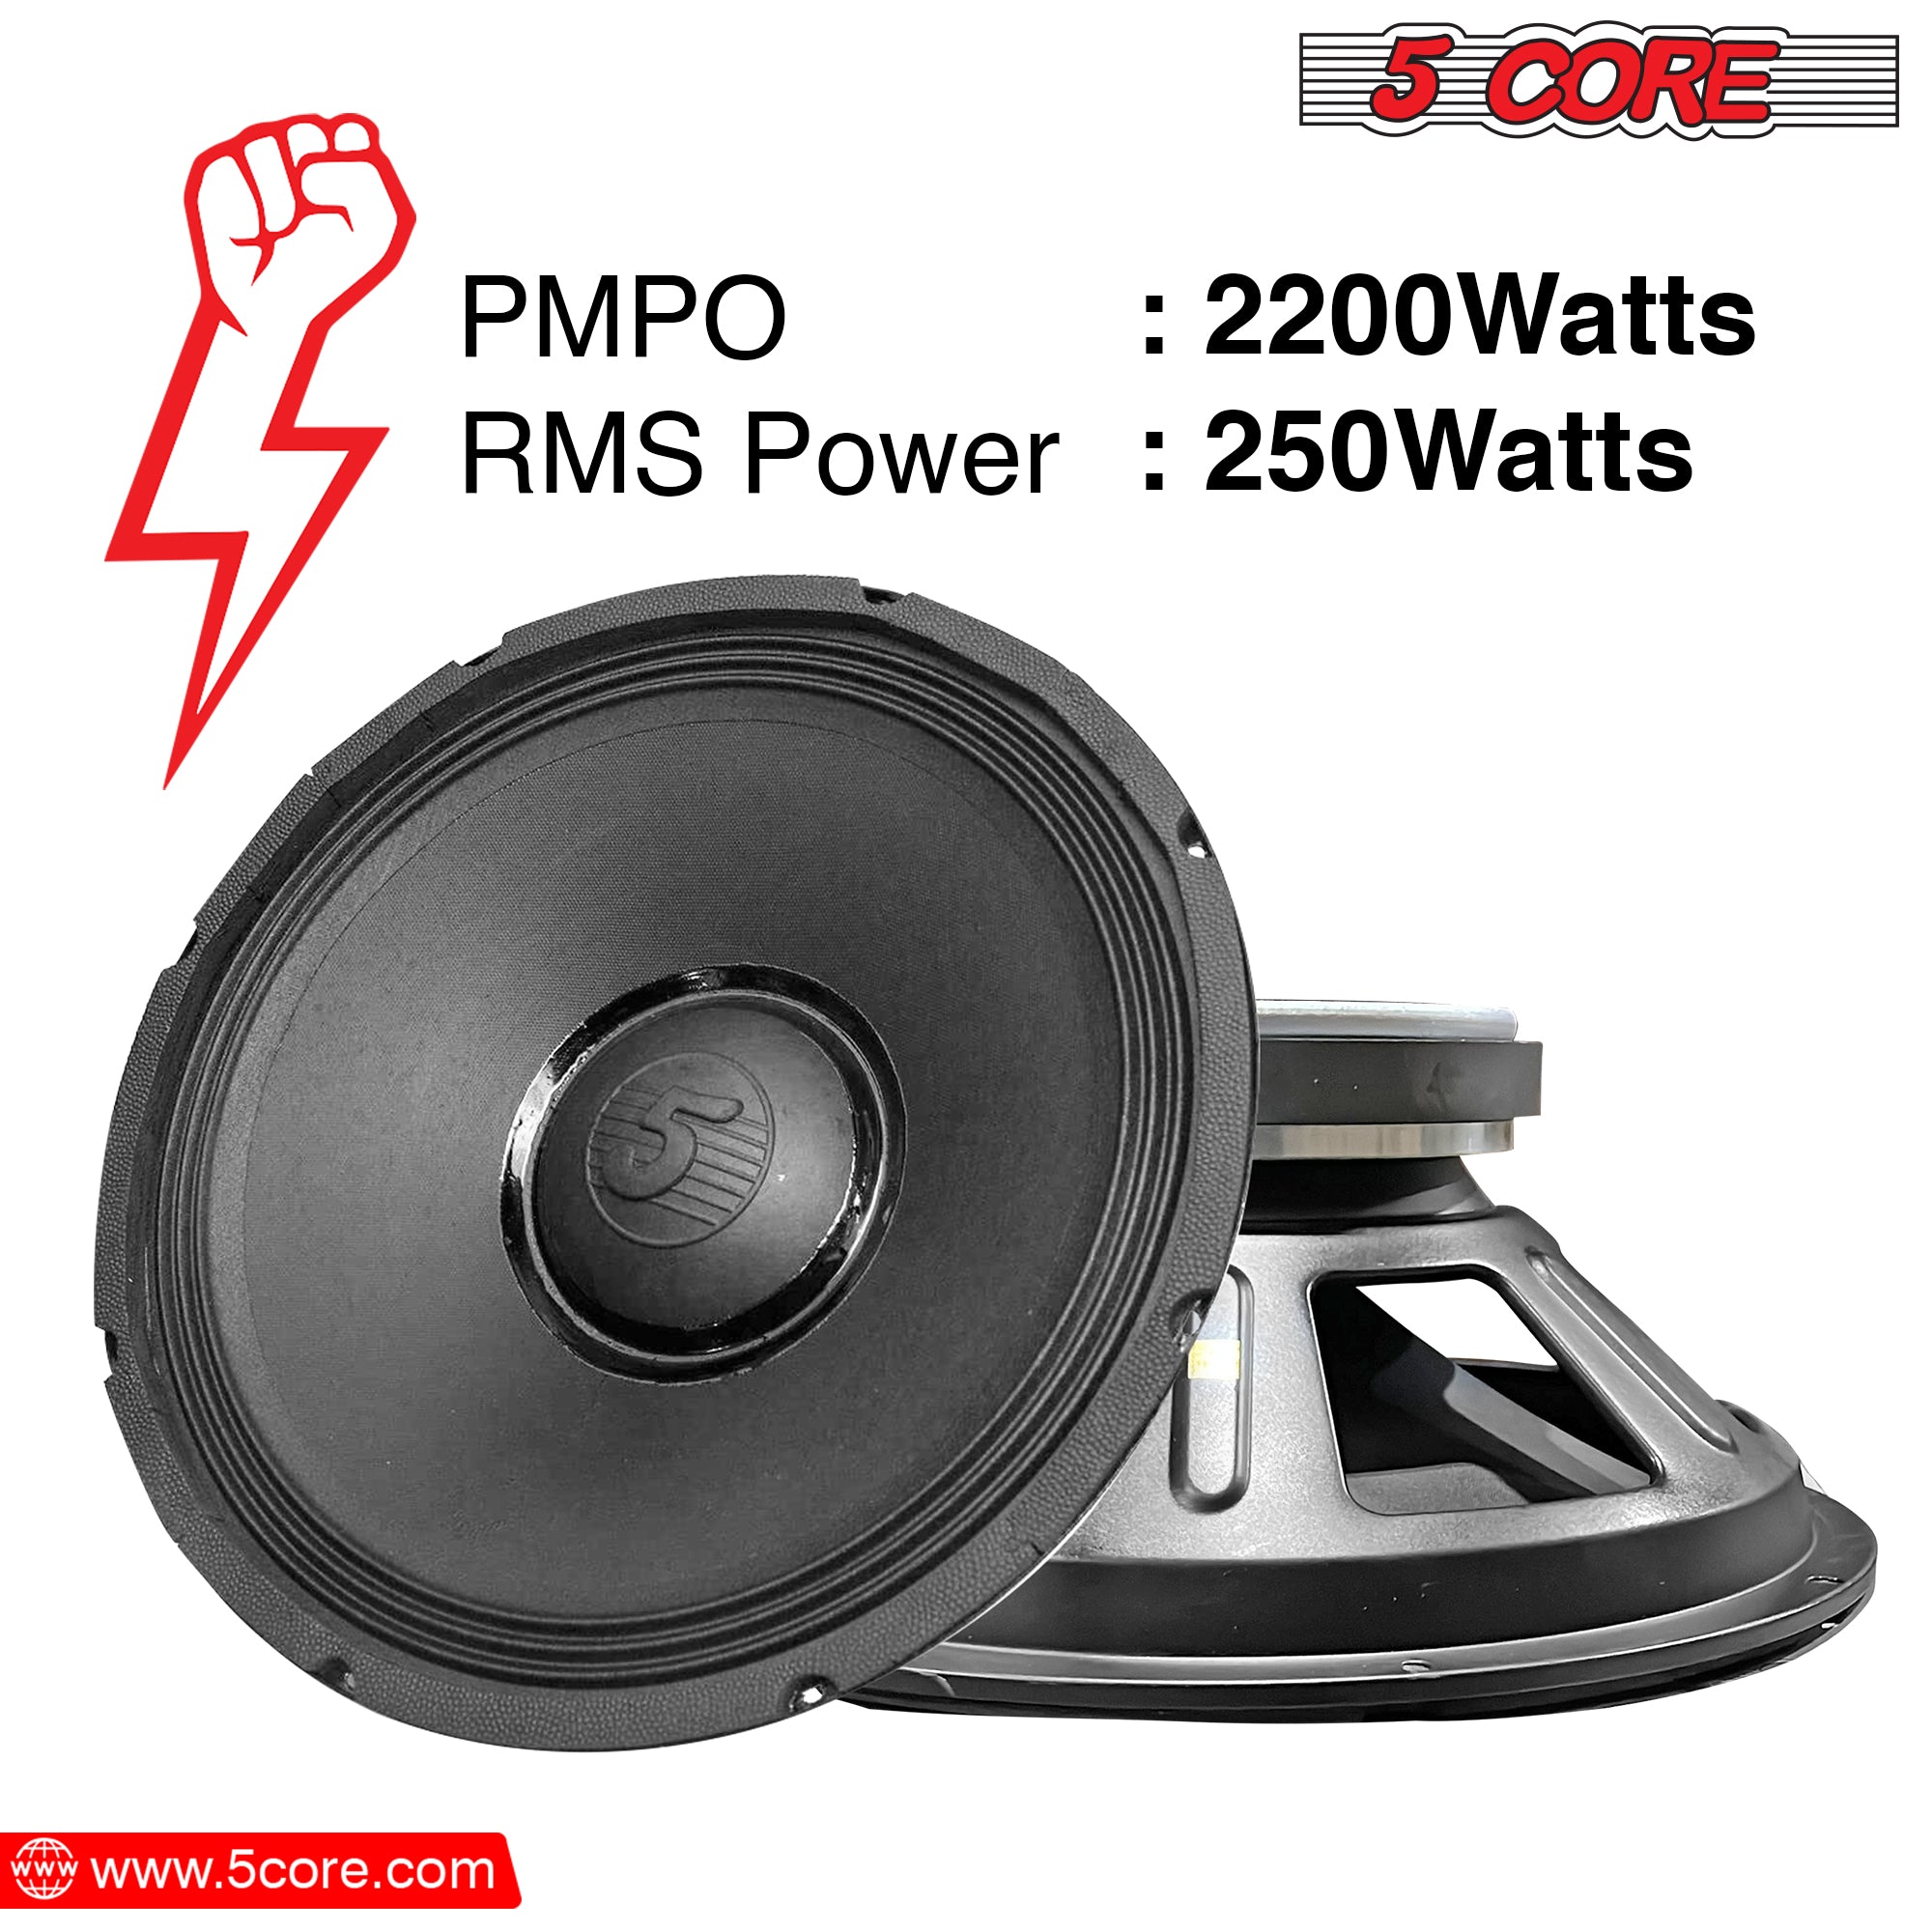 5 Core 15 Inch Subwoofers 2200W PMPO Raw Replacement Speaker 8 OHM Pro Audio Sub Woofer System Powerful Bass Surround Sound -15-185 MS 250W